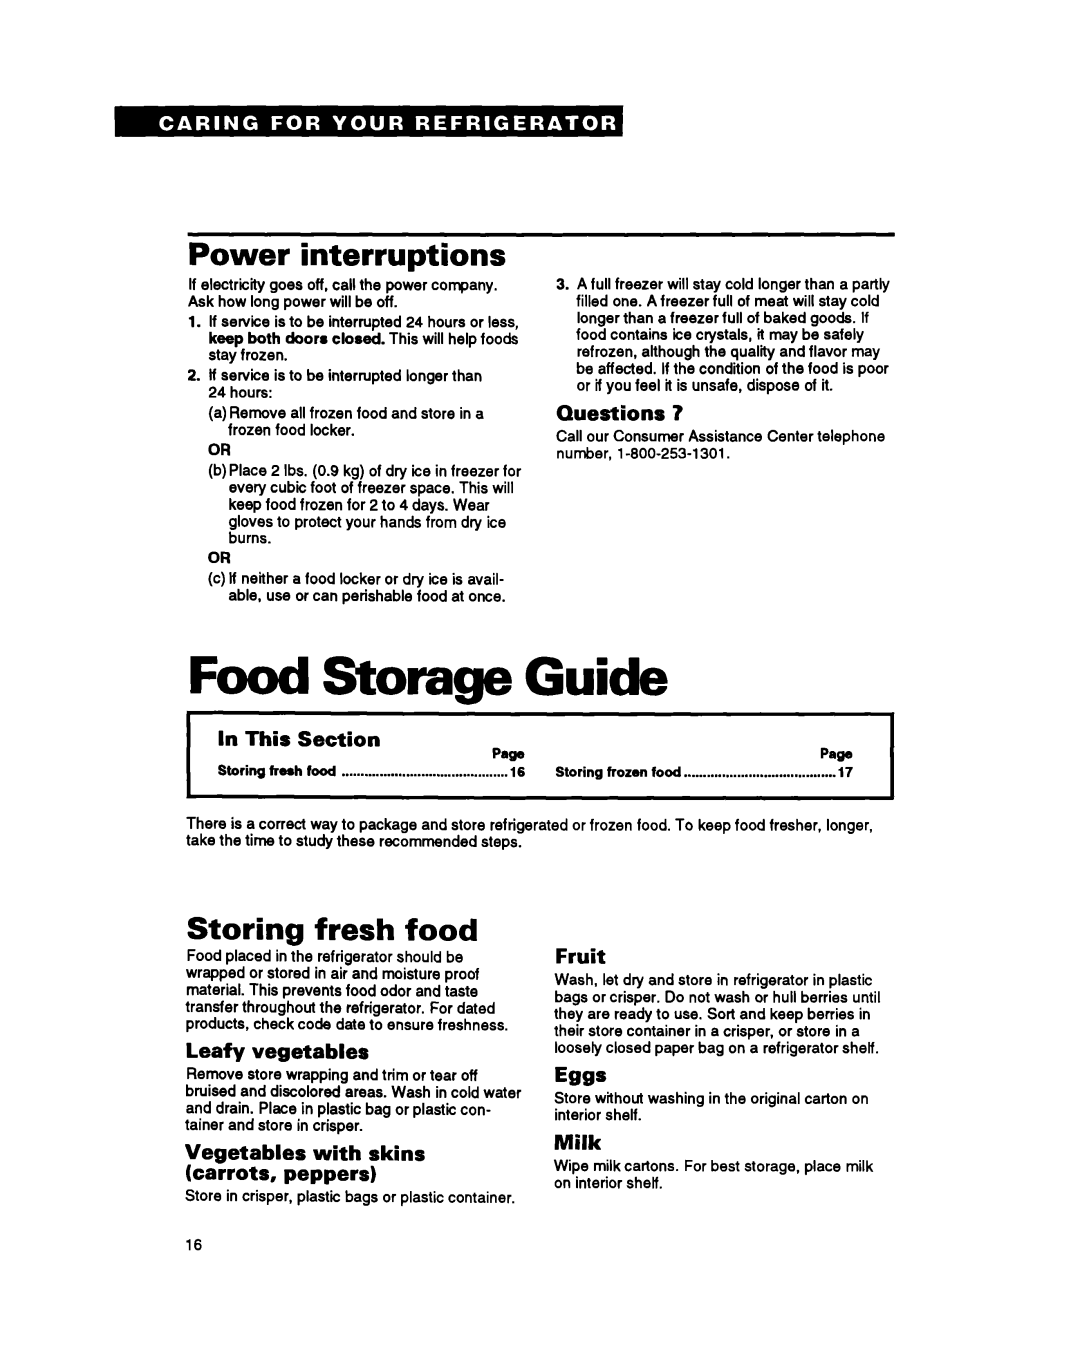 Whirlpool ET25PK Food Storage Guide, Power interruptions, Storing fresh food, Questions, In This Section p*f#P*liP, Fruit 